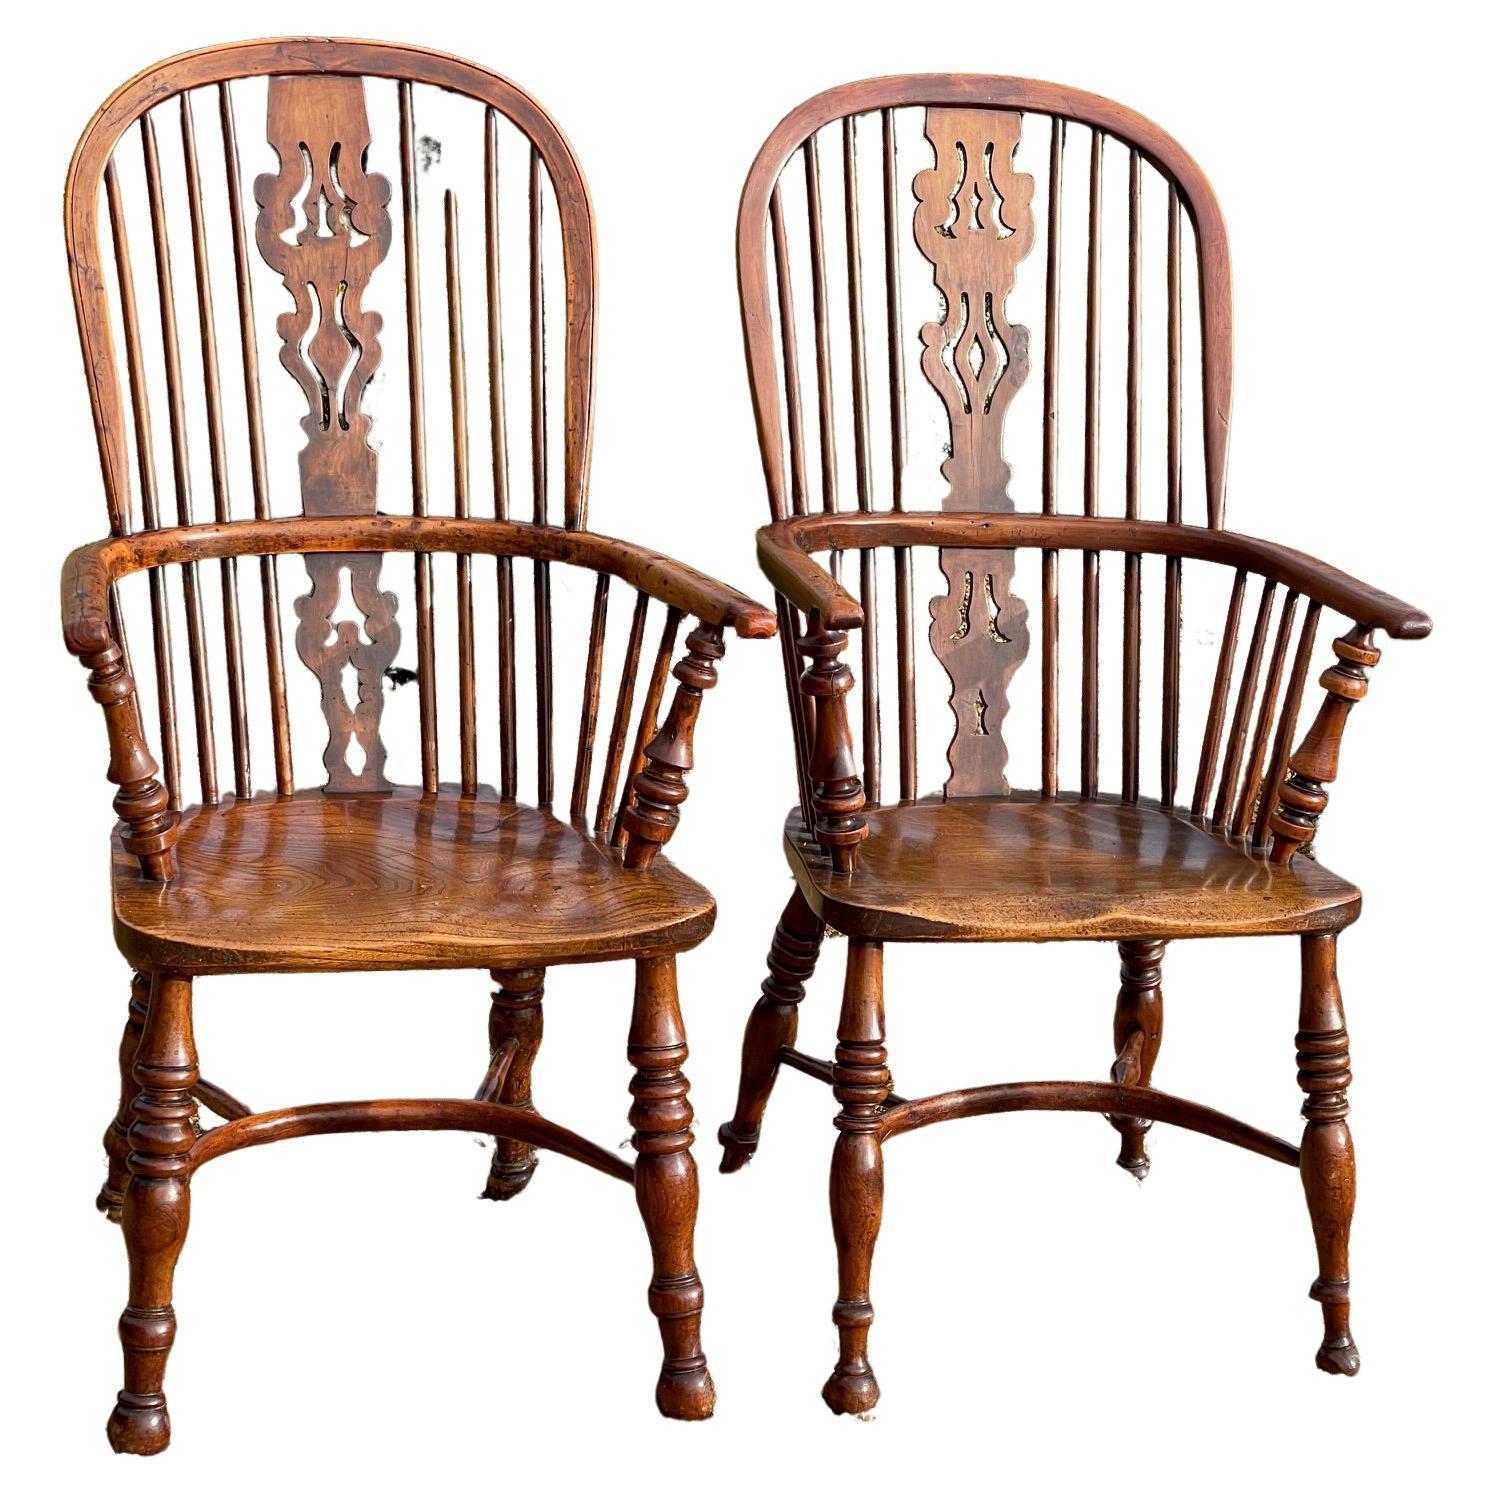 Near pair of yew wood Windsor chairs with crinoline stretchers